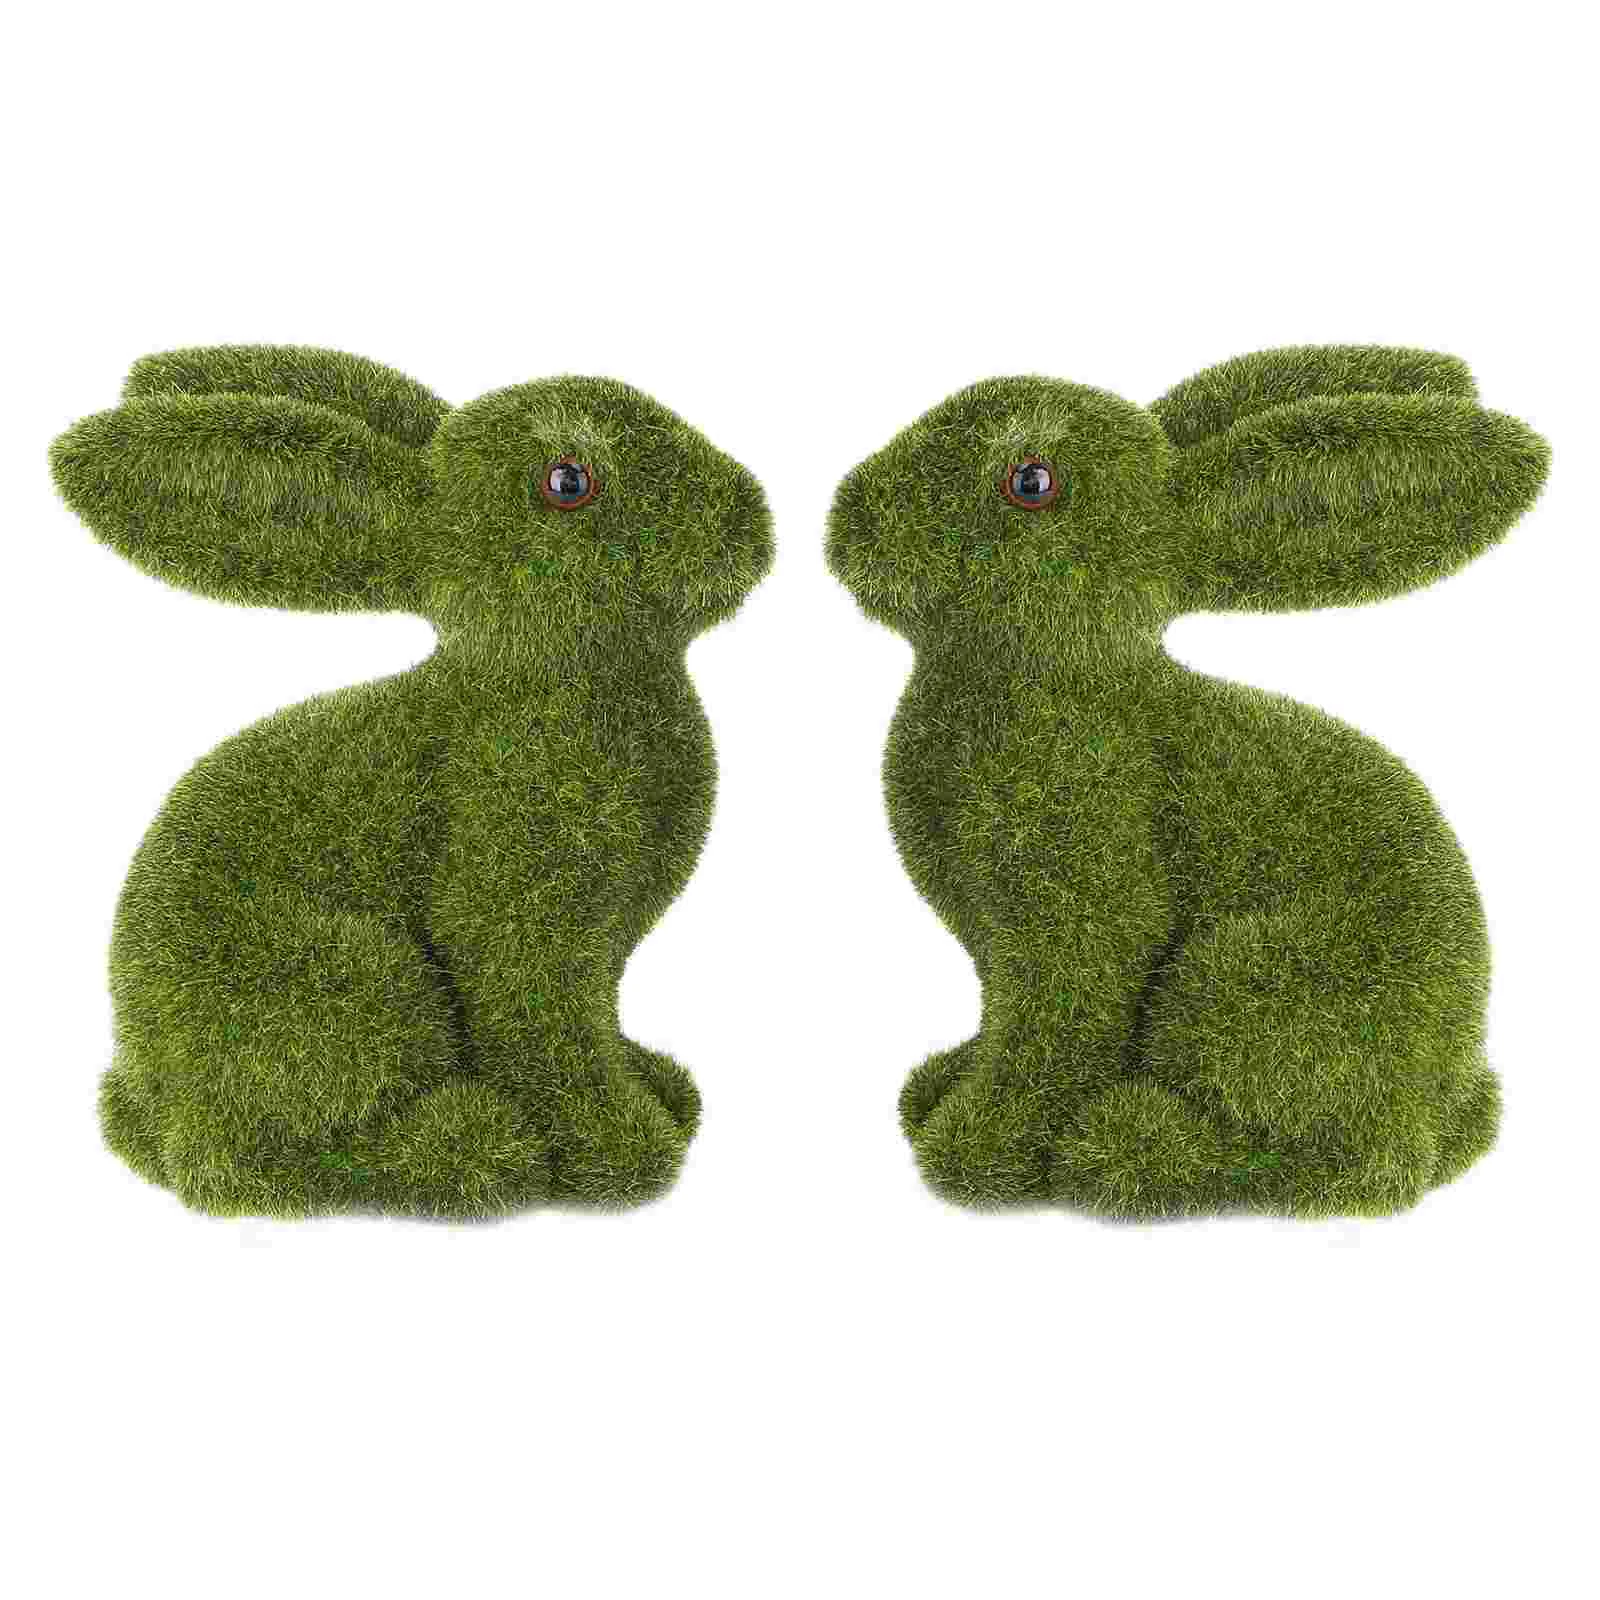 

Moss Rabbit Bunny Easter Animal Decor Figurines Sculpture Flocked Holiday Table Fake Faux Sculptures Green Centerpieces